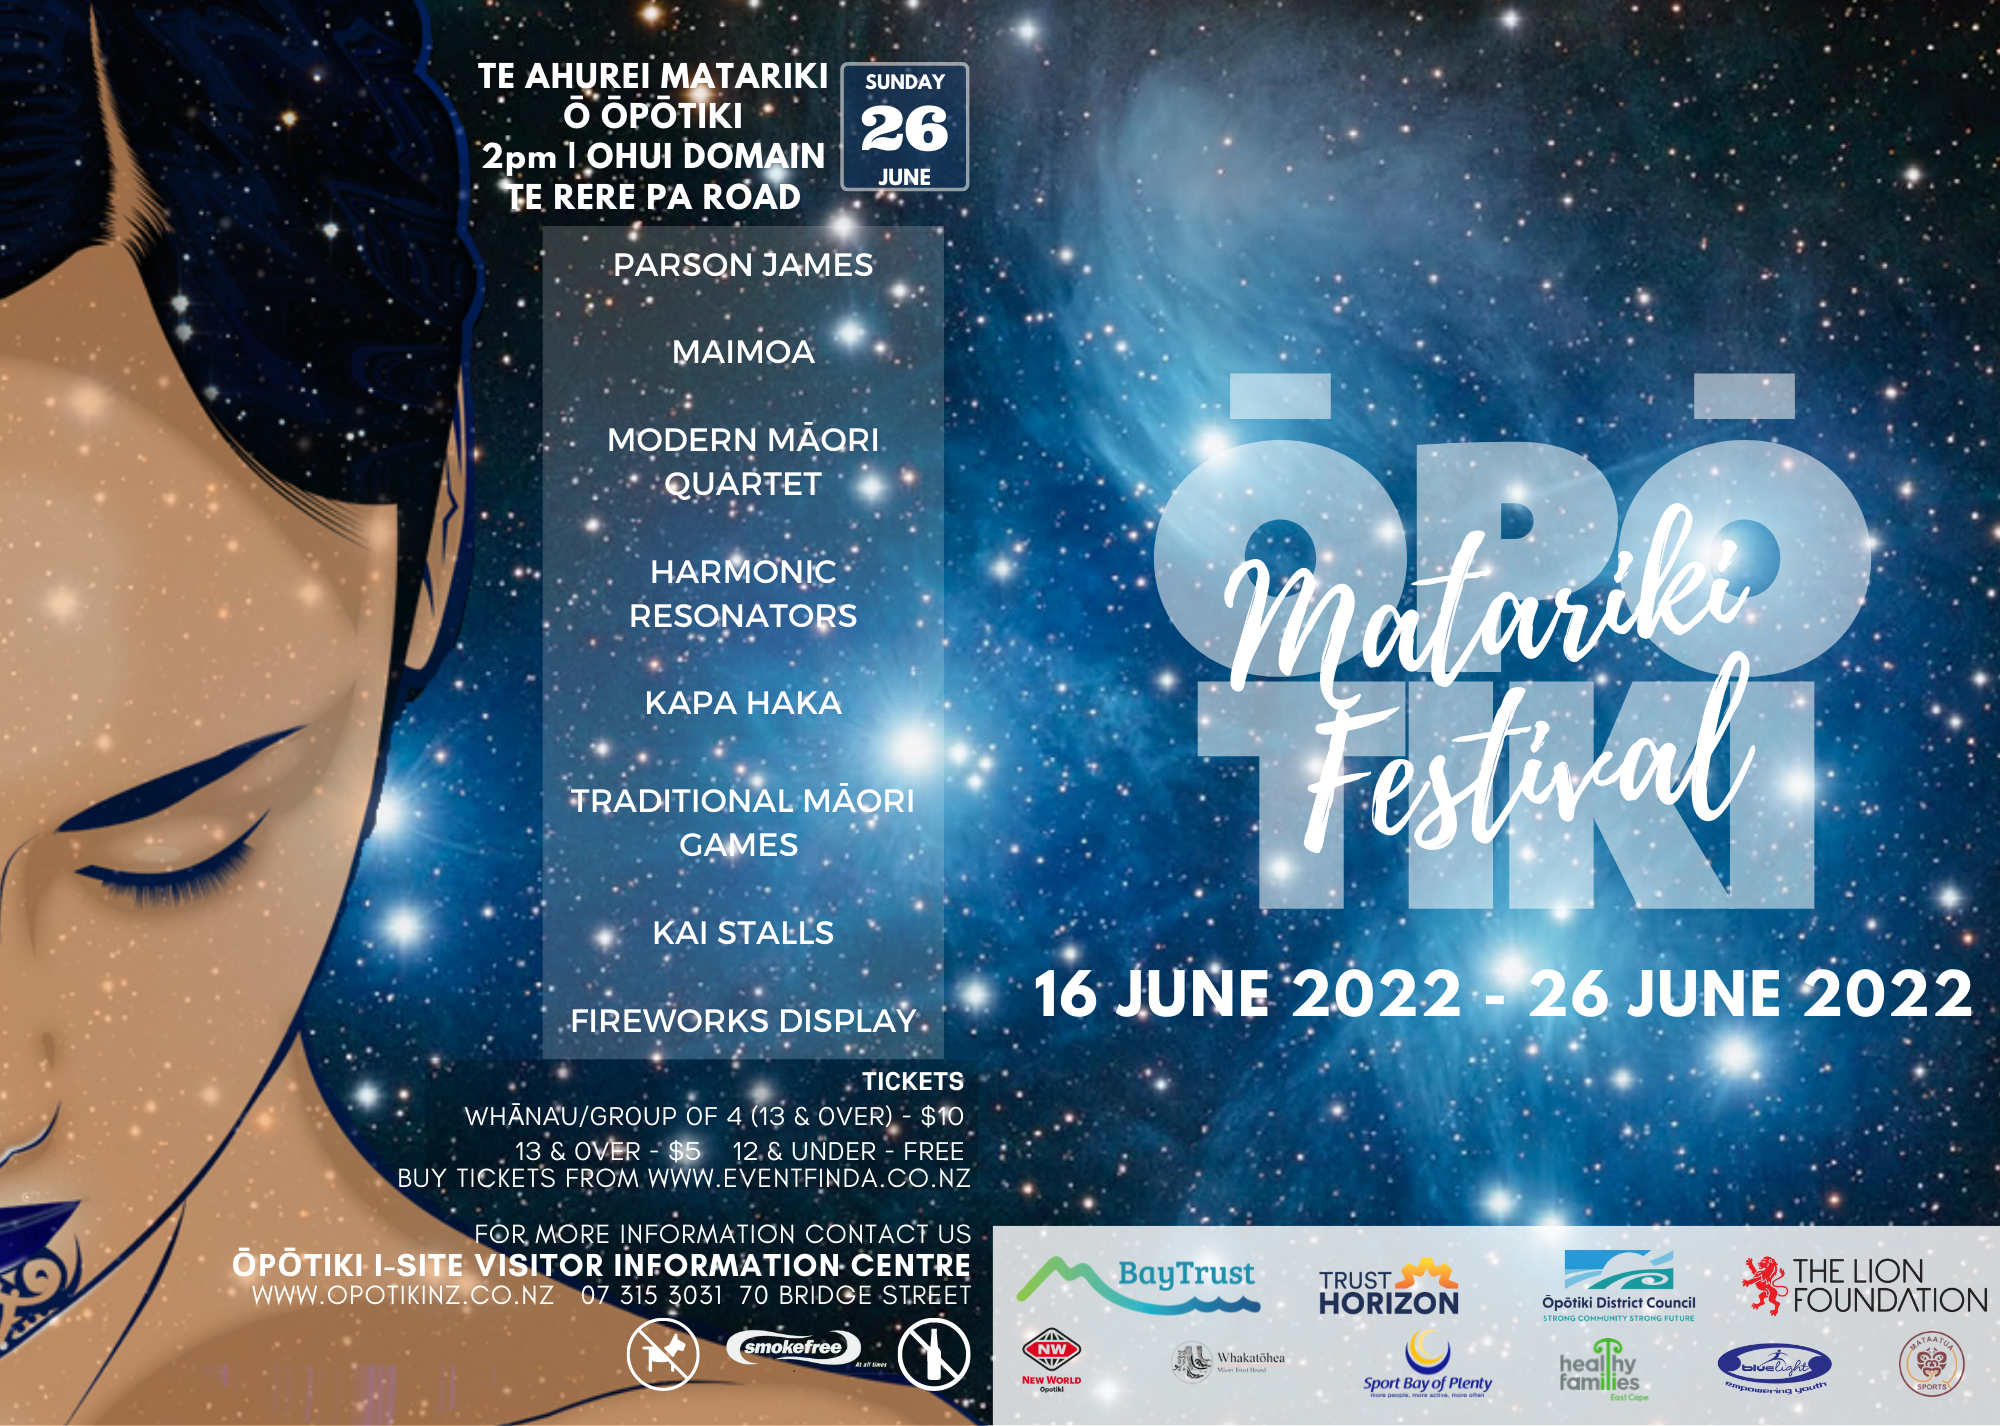 Graphic of the Opotiki Matariki Festival 2022 poster showing details of the festival dates and final concert and fireworks